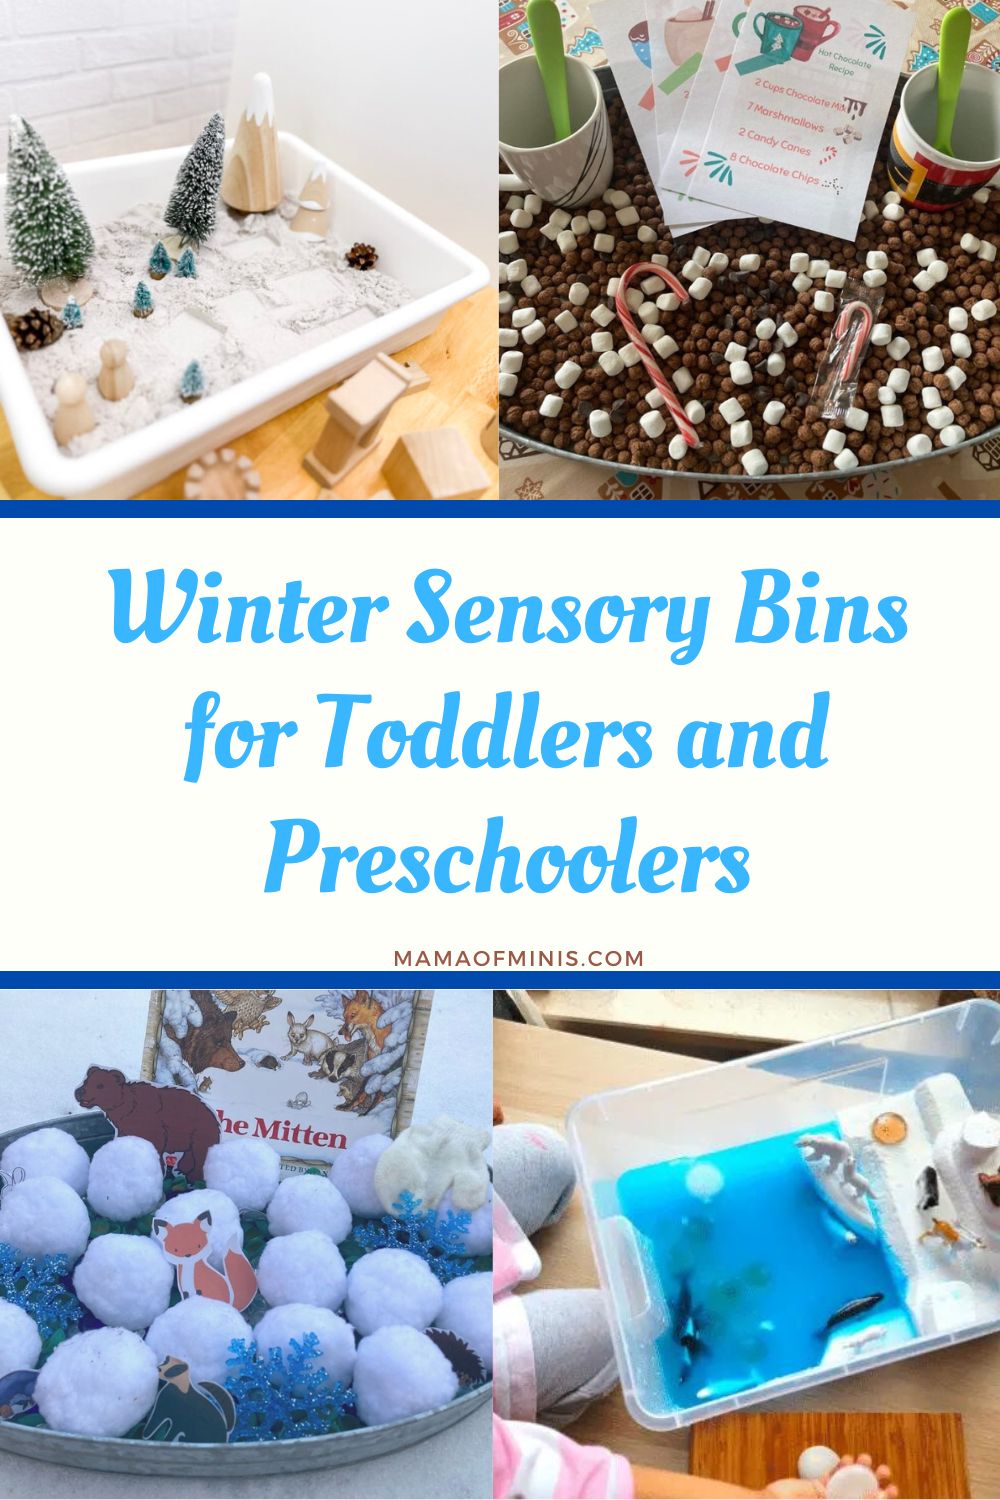 Winter Sensory Bins for Toddlers and Preschoolers Pin